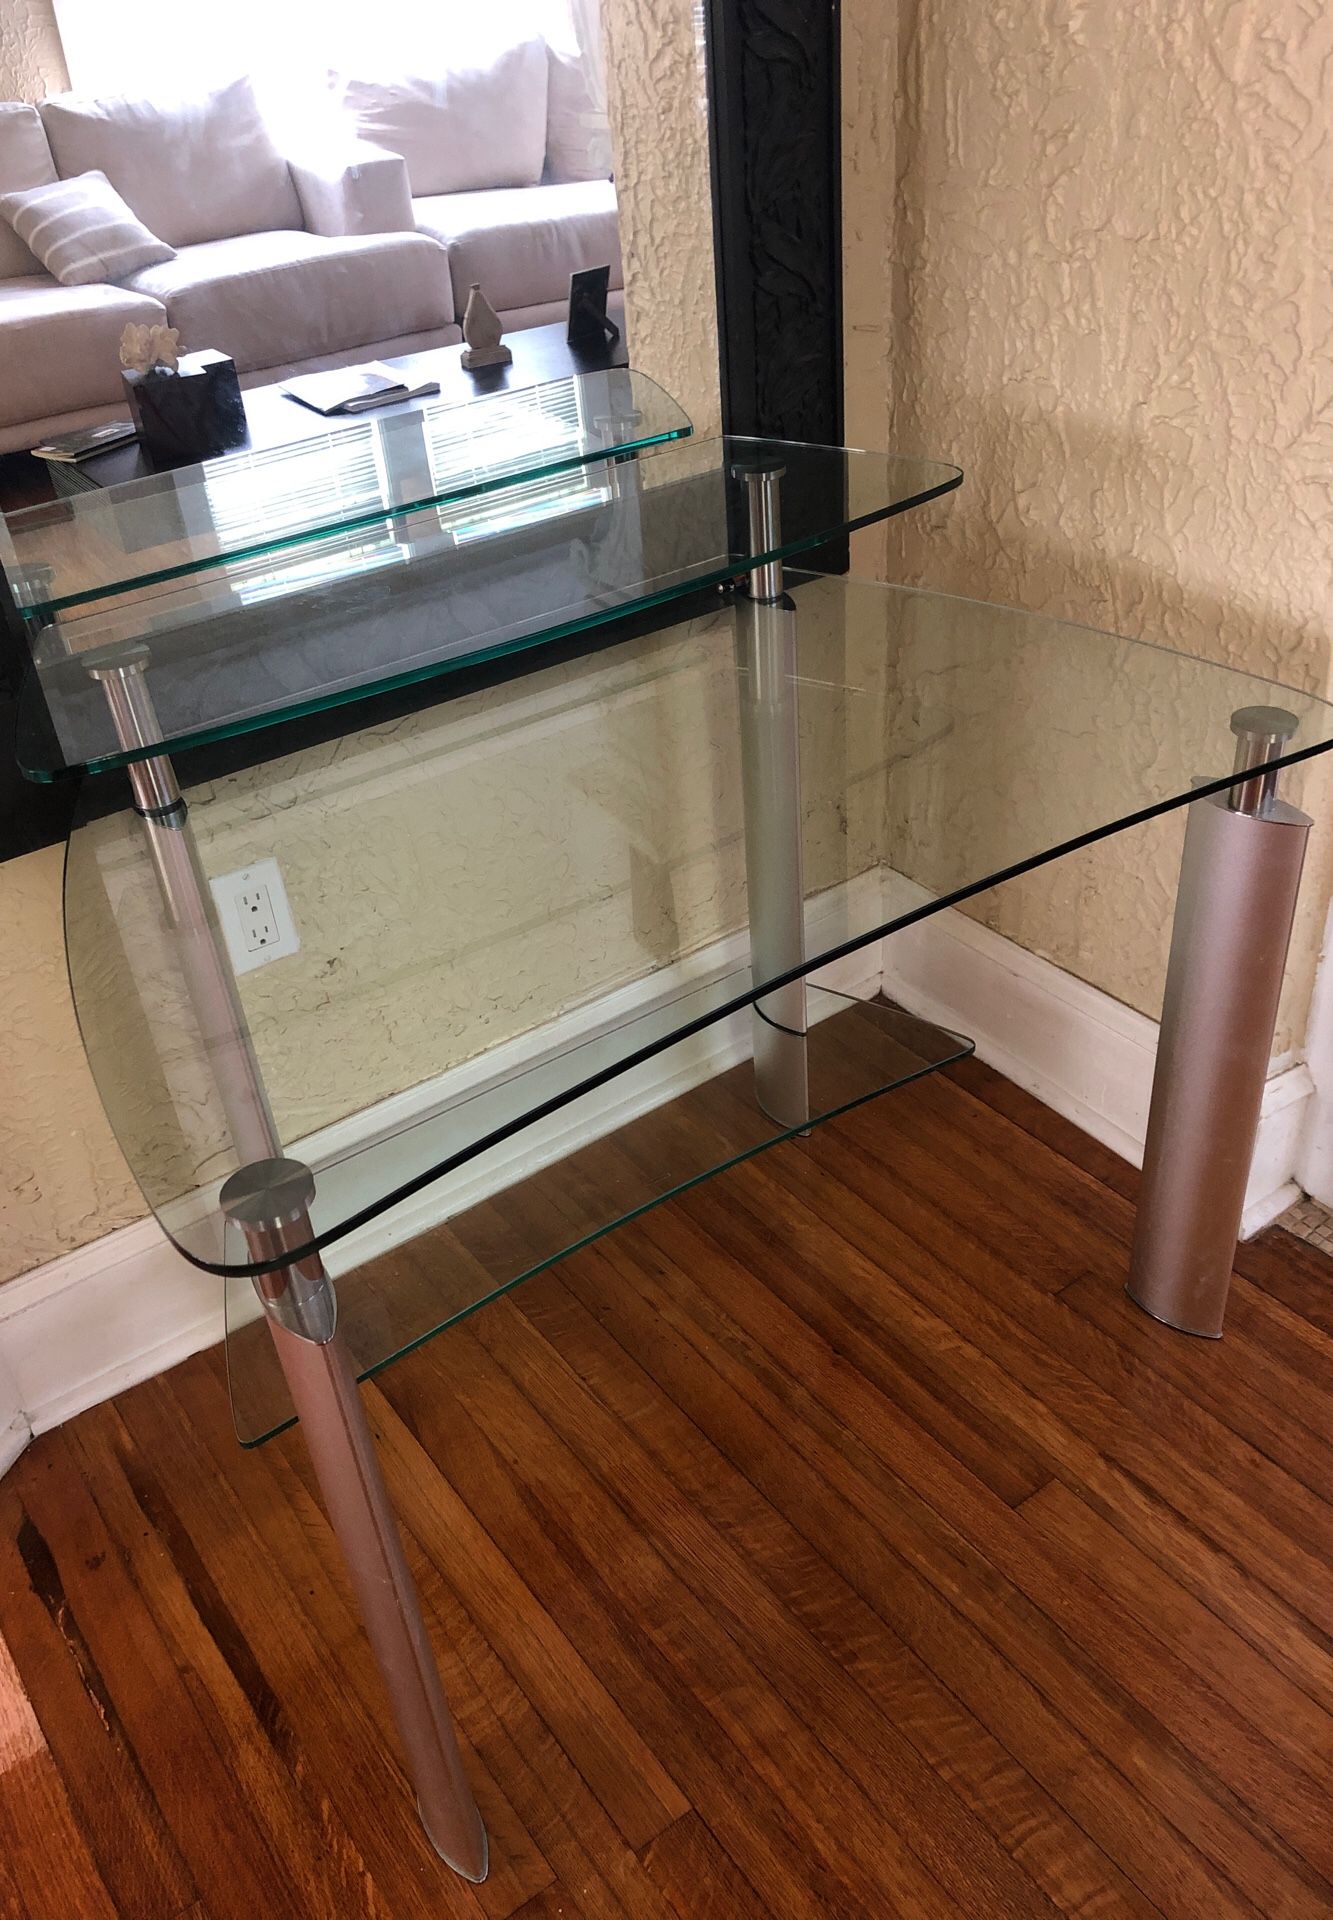 Excelent quality ,almost new, glass top desk!!!!! Great opportunity!